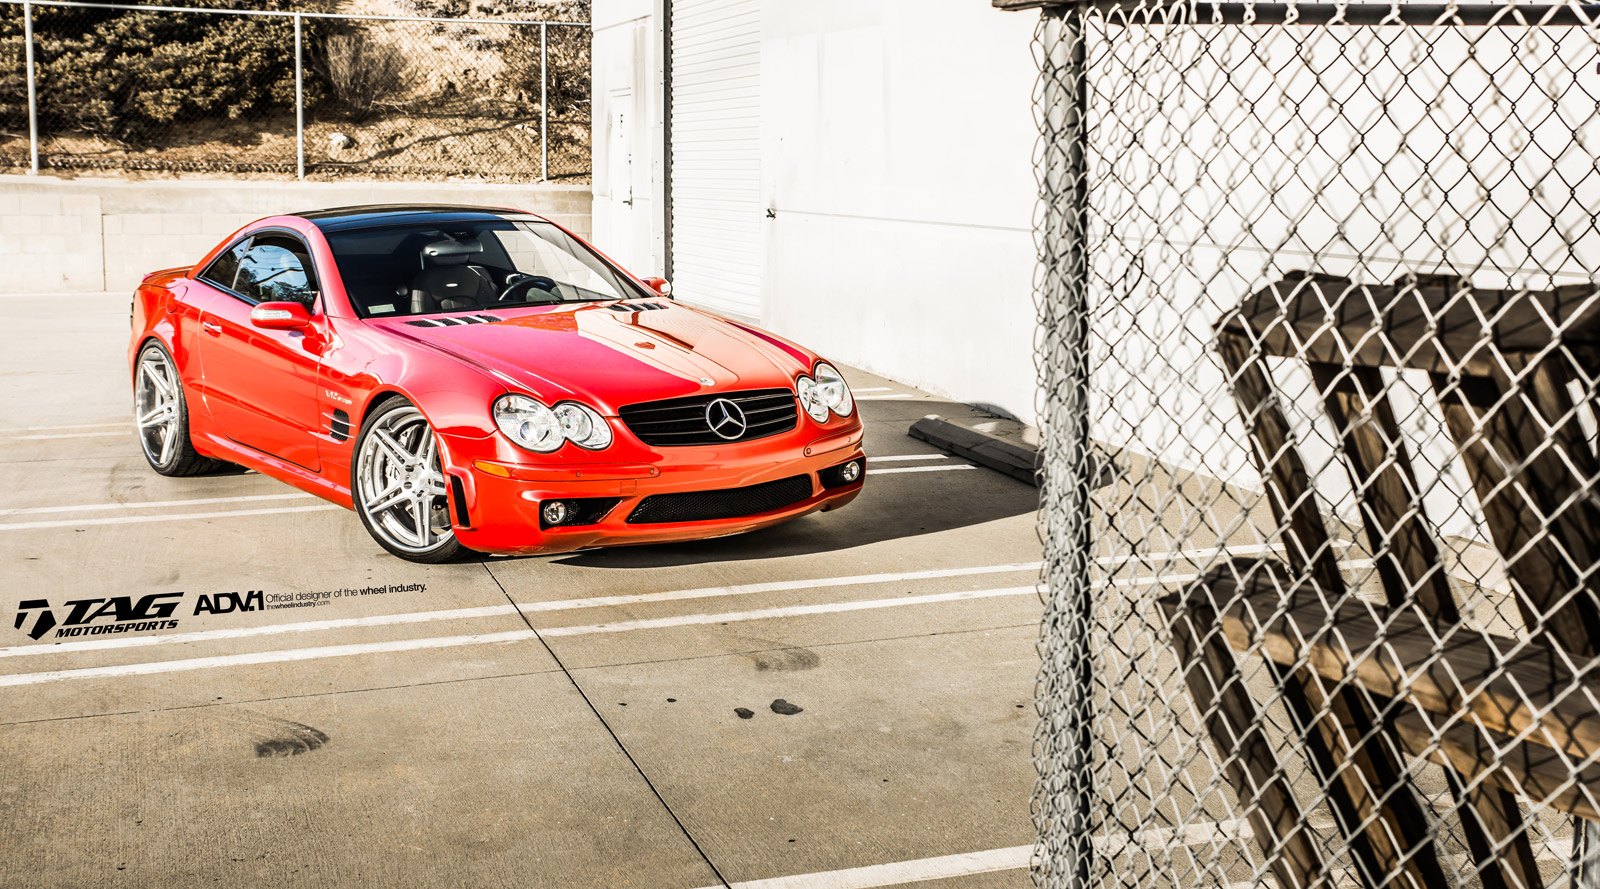 Aftermarket Vented Hood on Red Mercedes SL Class - Photo by ADV.1